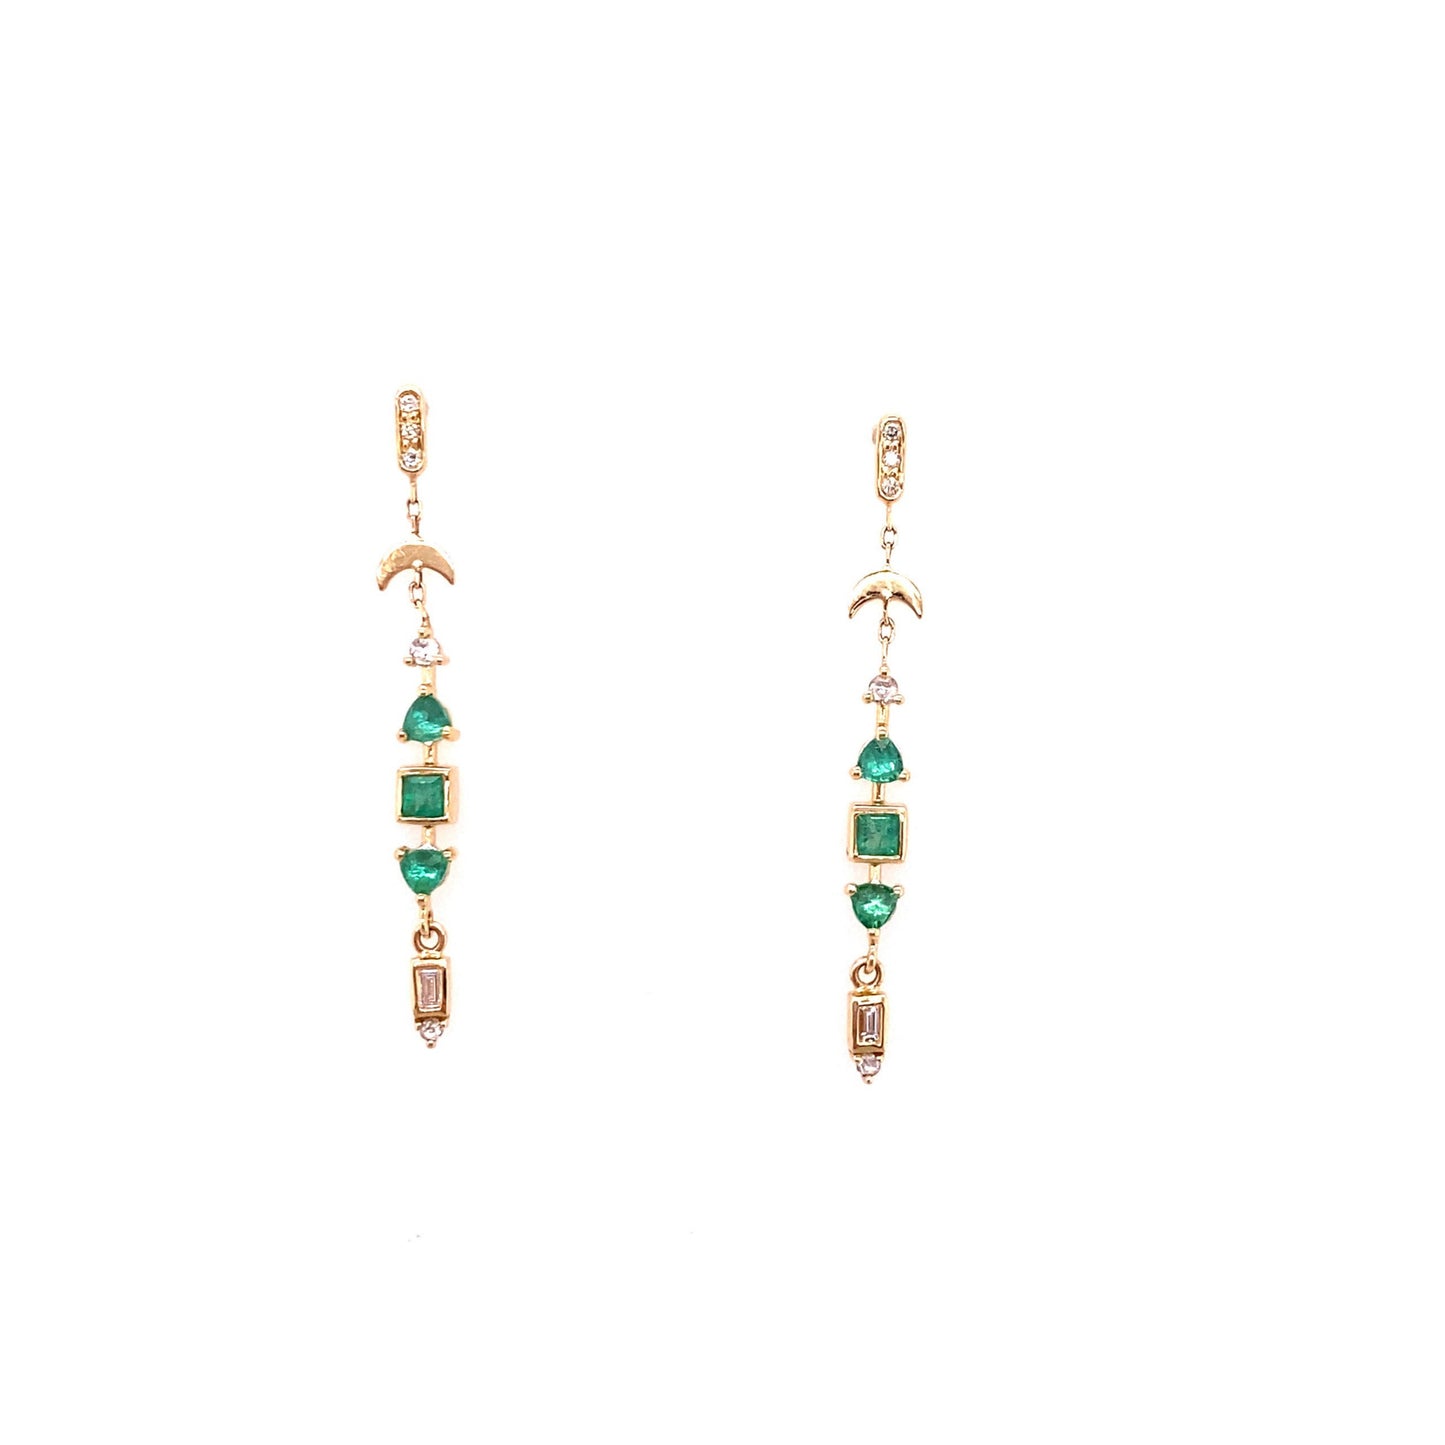 Celine Daoust 14kt Yellow Gold Emerald and Diamond Moon Totem Earrings